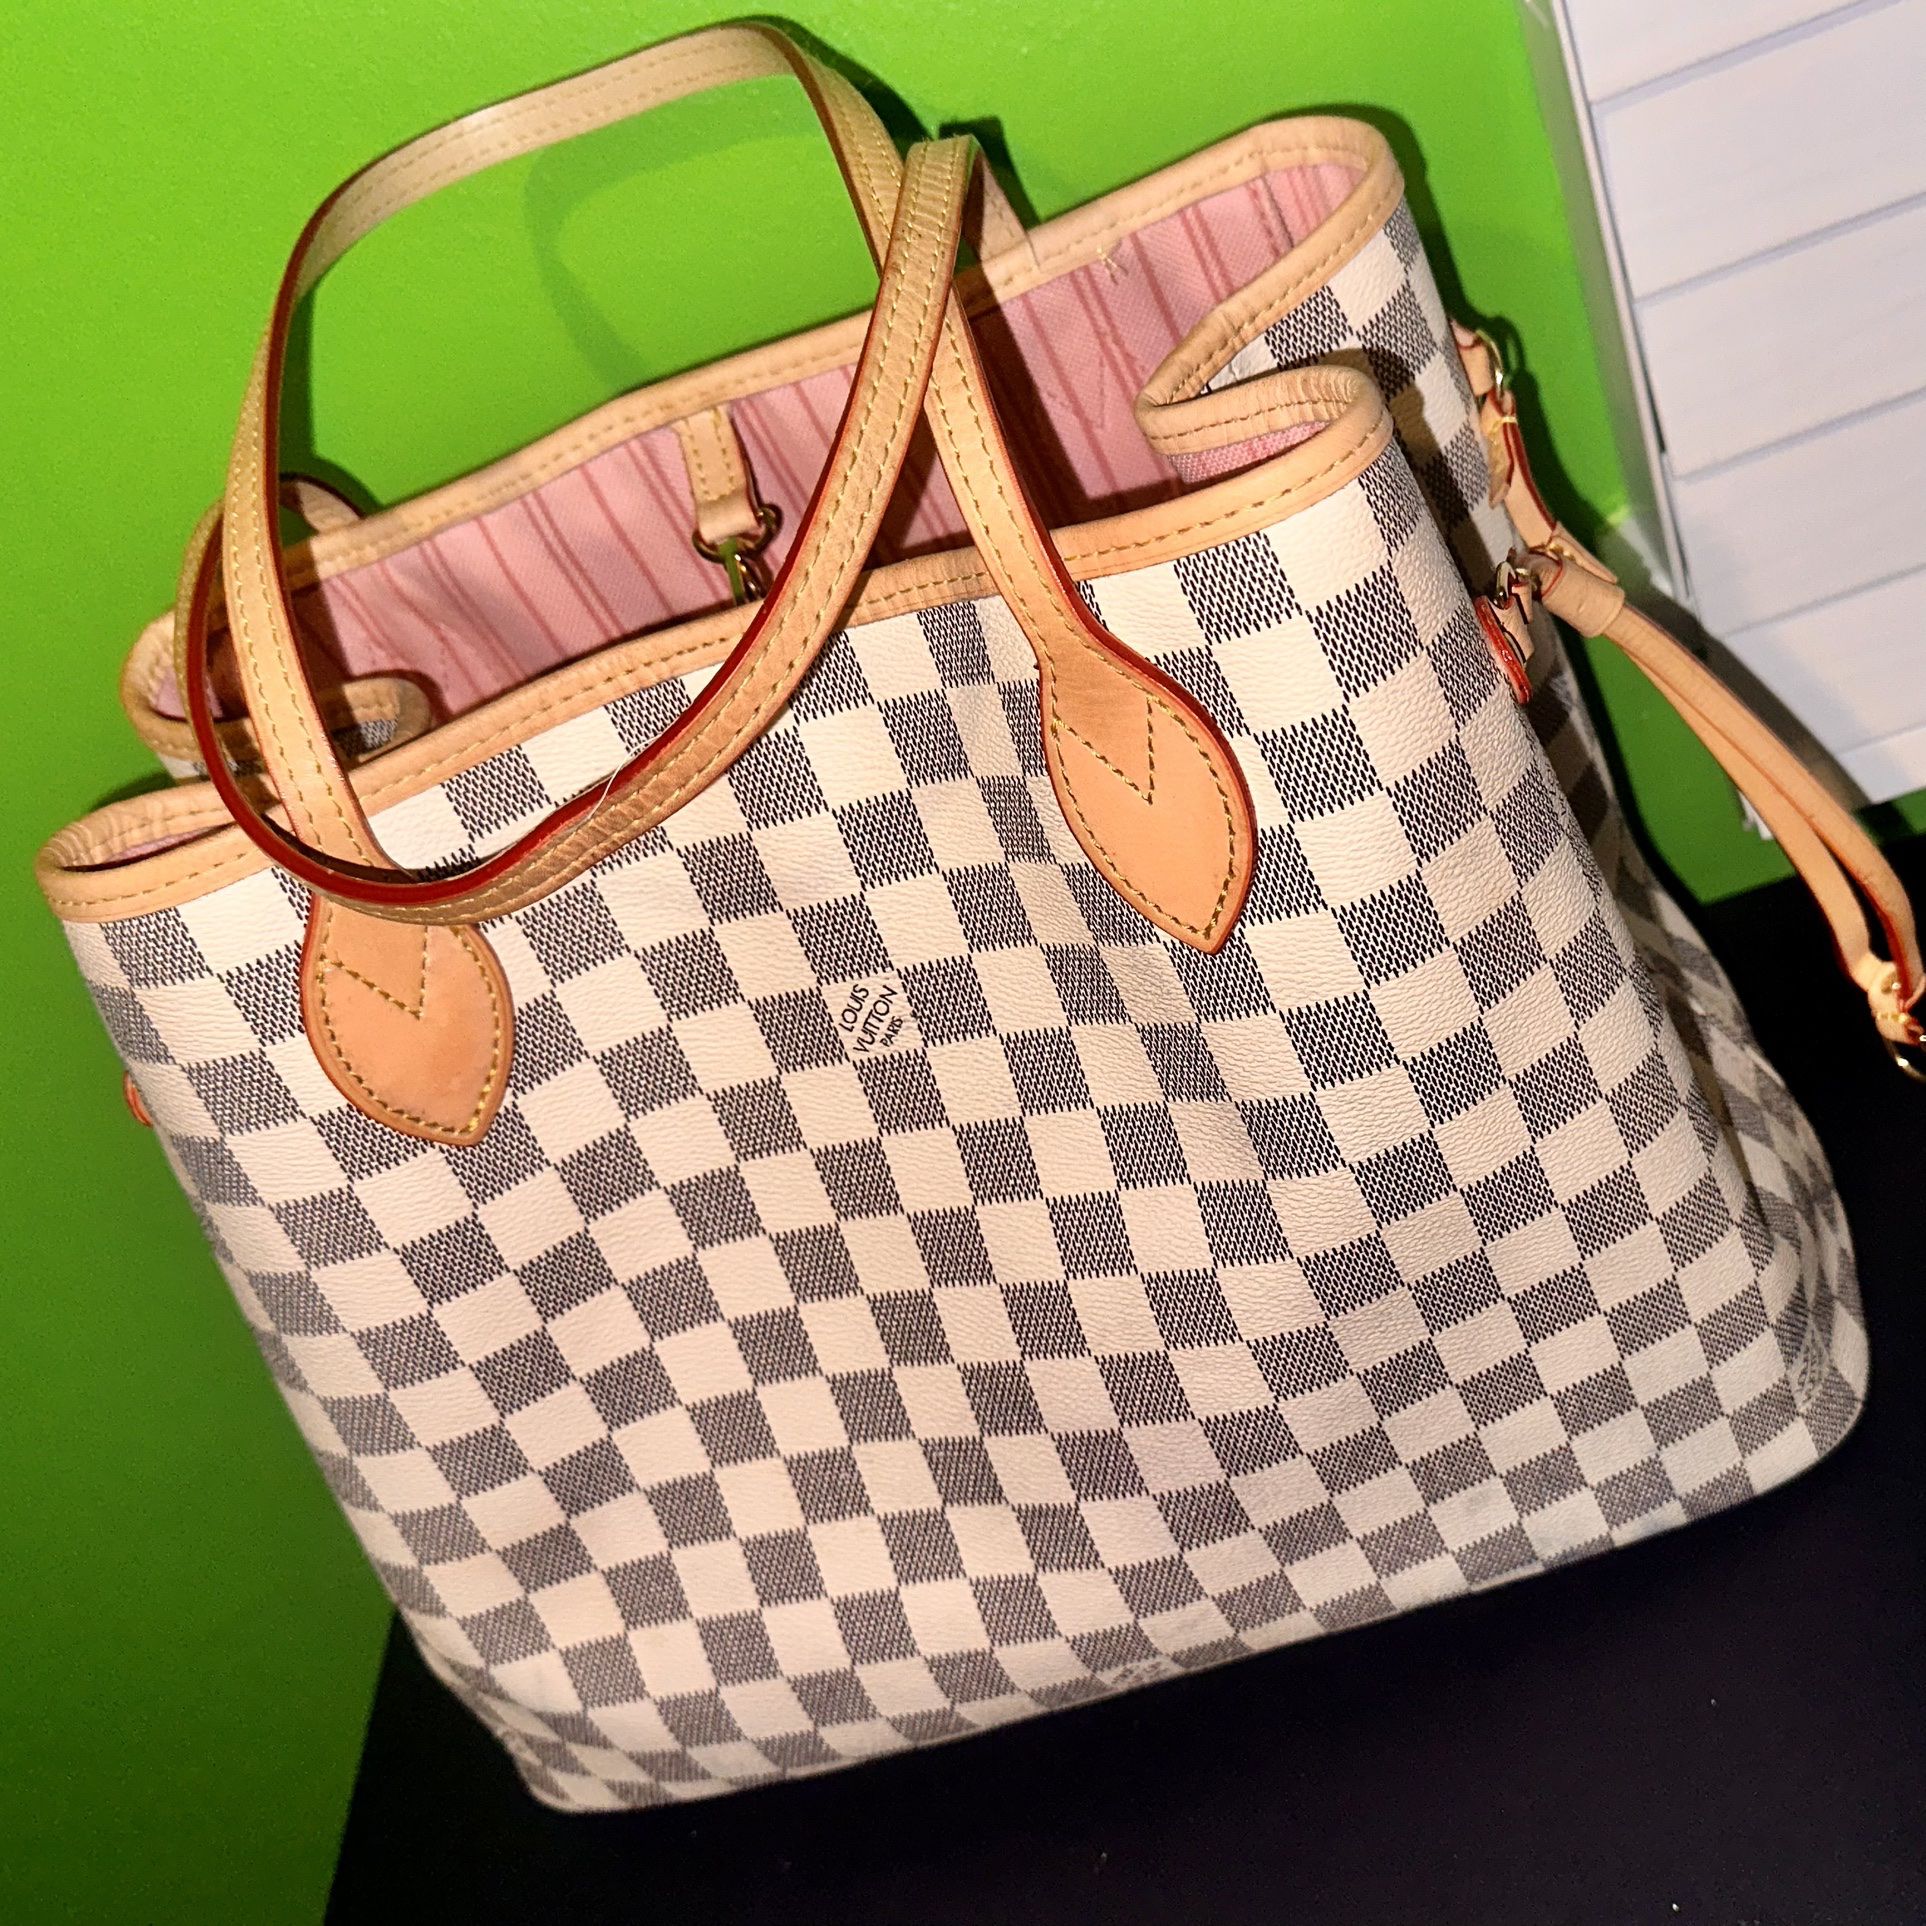 Louis Vuitton Bag for Sale in Los Angeles, CA - OfferUp